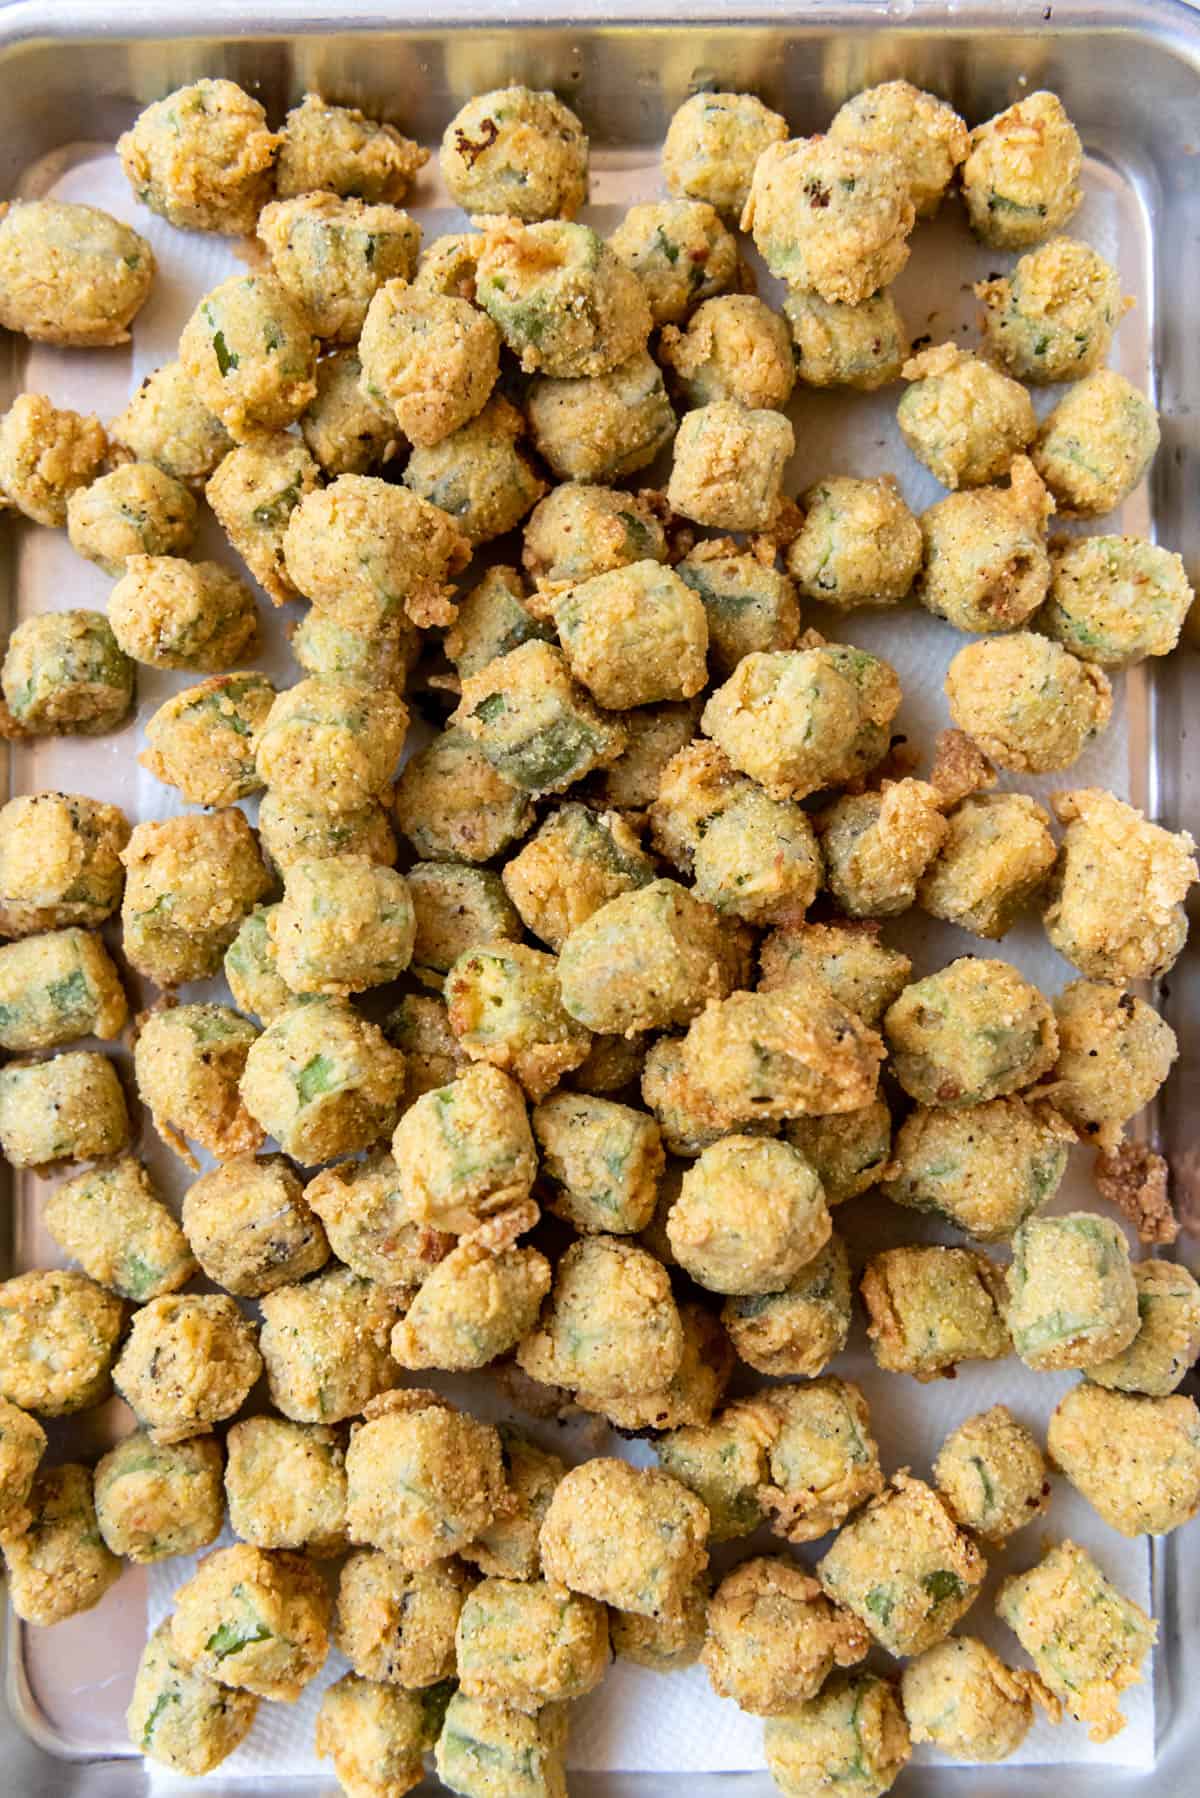 A close image of fried okra draining on paper towels.